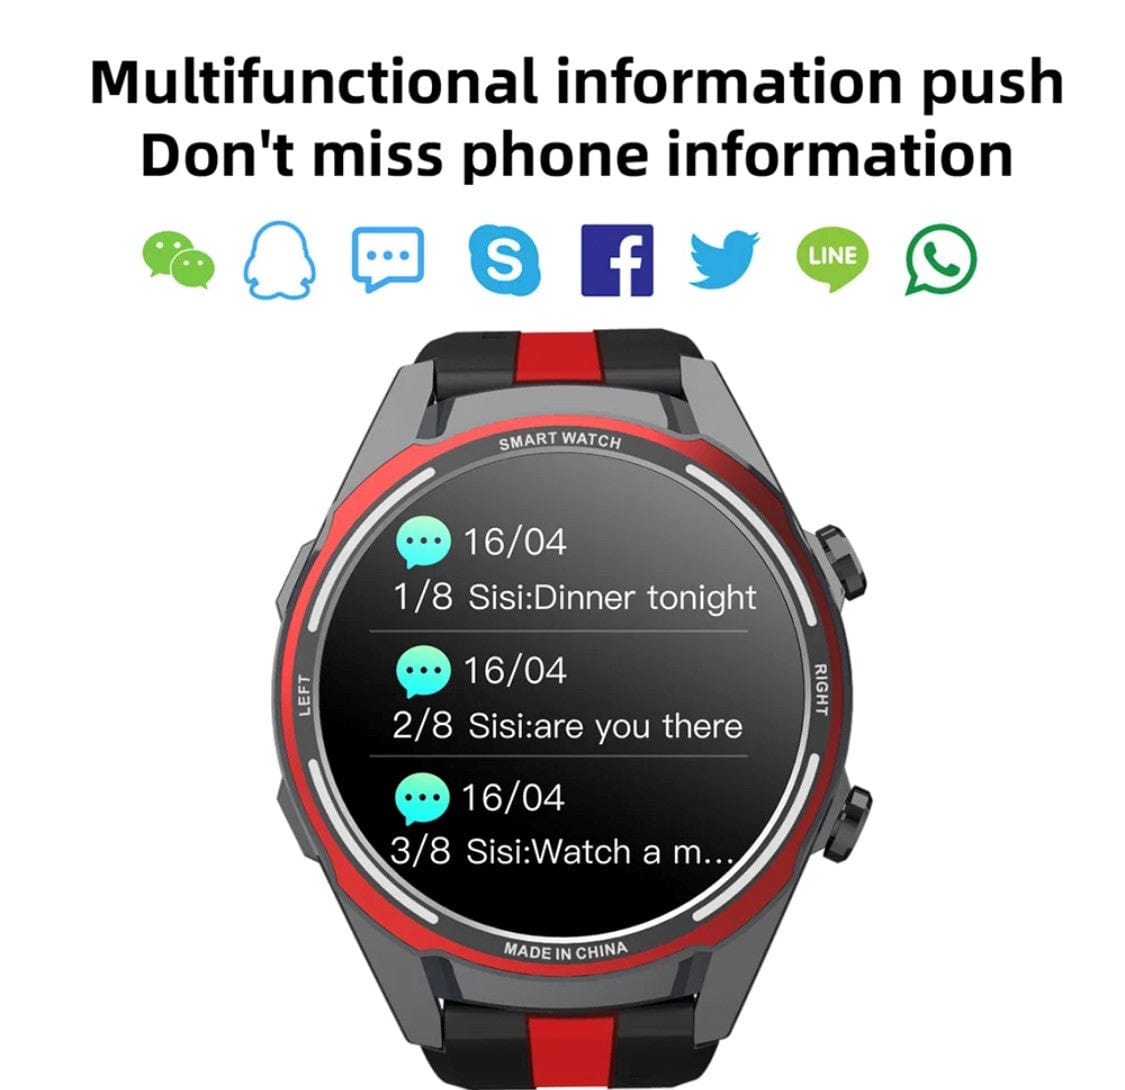 Smart Watch South Africa Watches Black SENBONO Max 16 Red